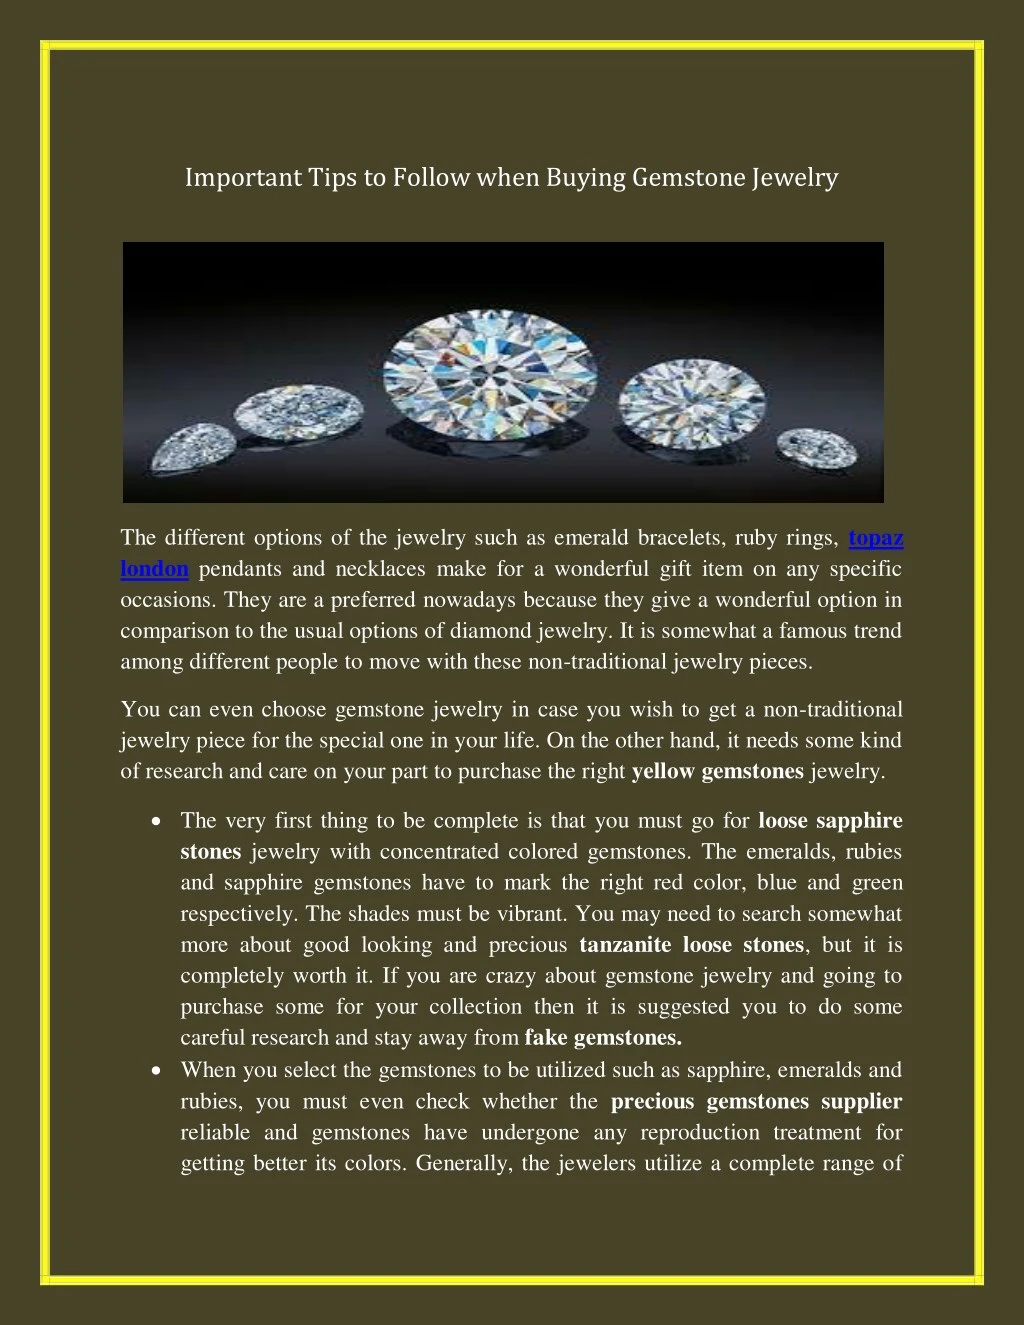 important tips to follow when buying gemstone